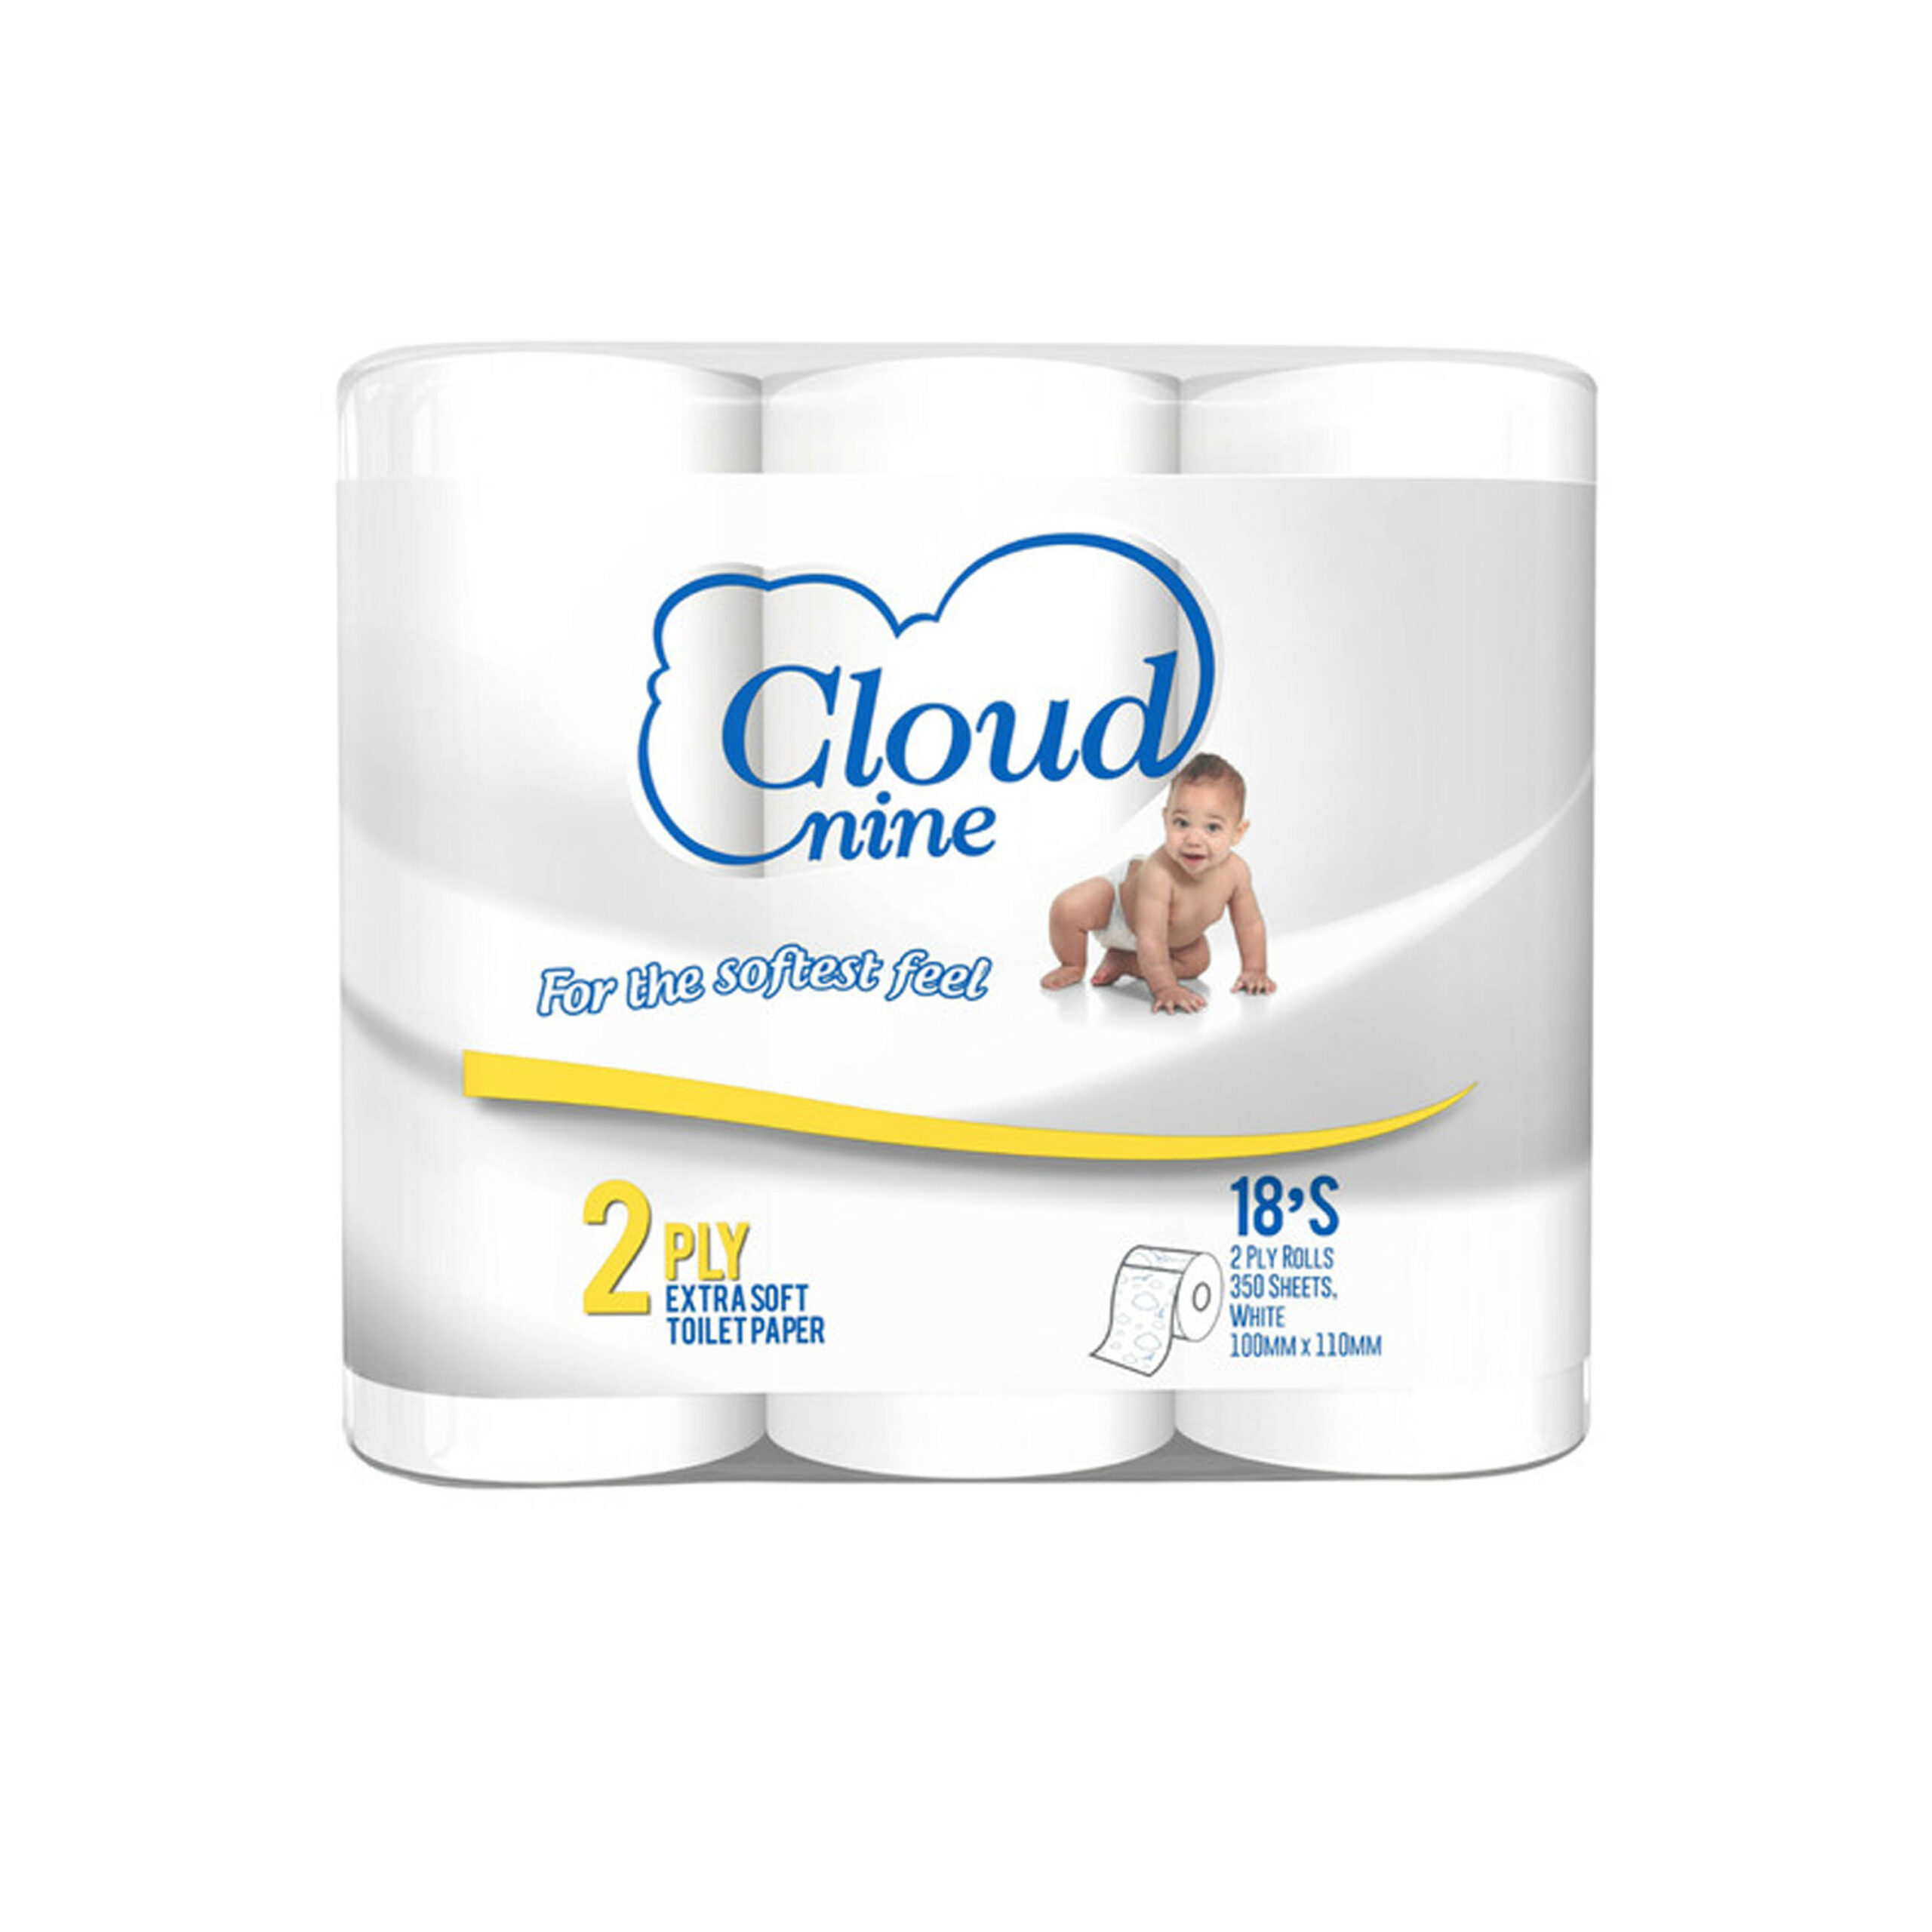 CLOUD NINE
TOILET PAPER
ROLL WHITE 2 PLY
350 SHEETS 18's